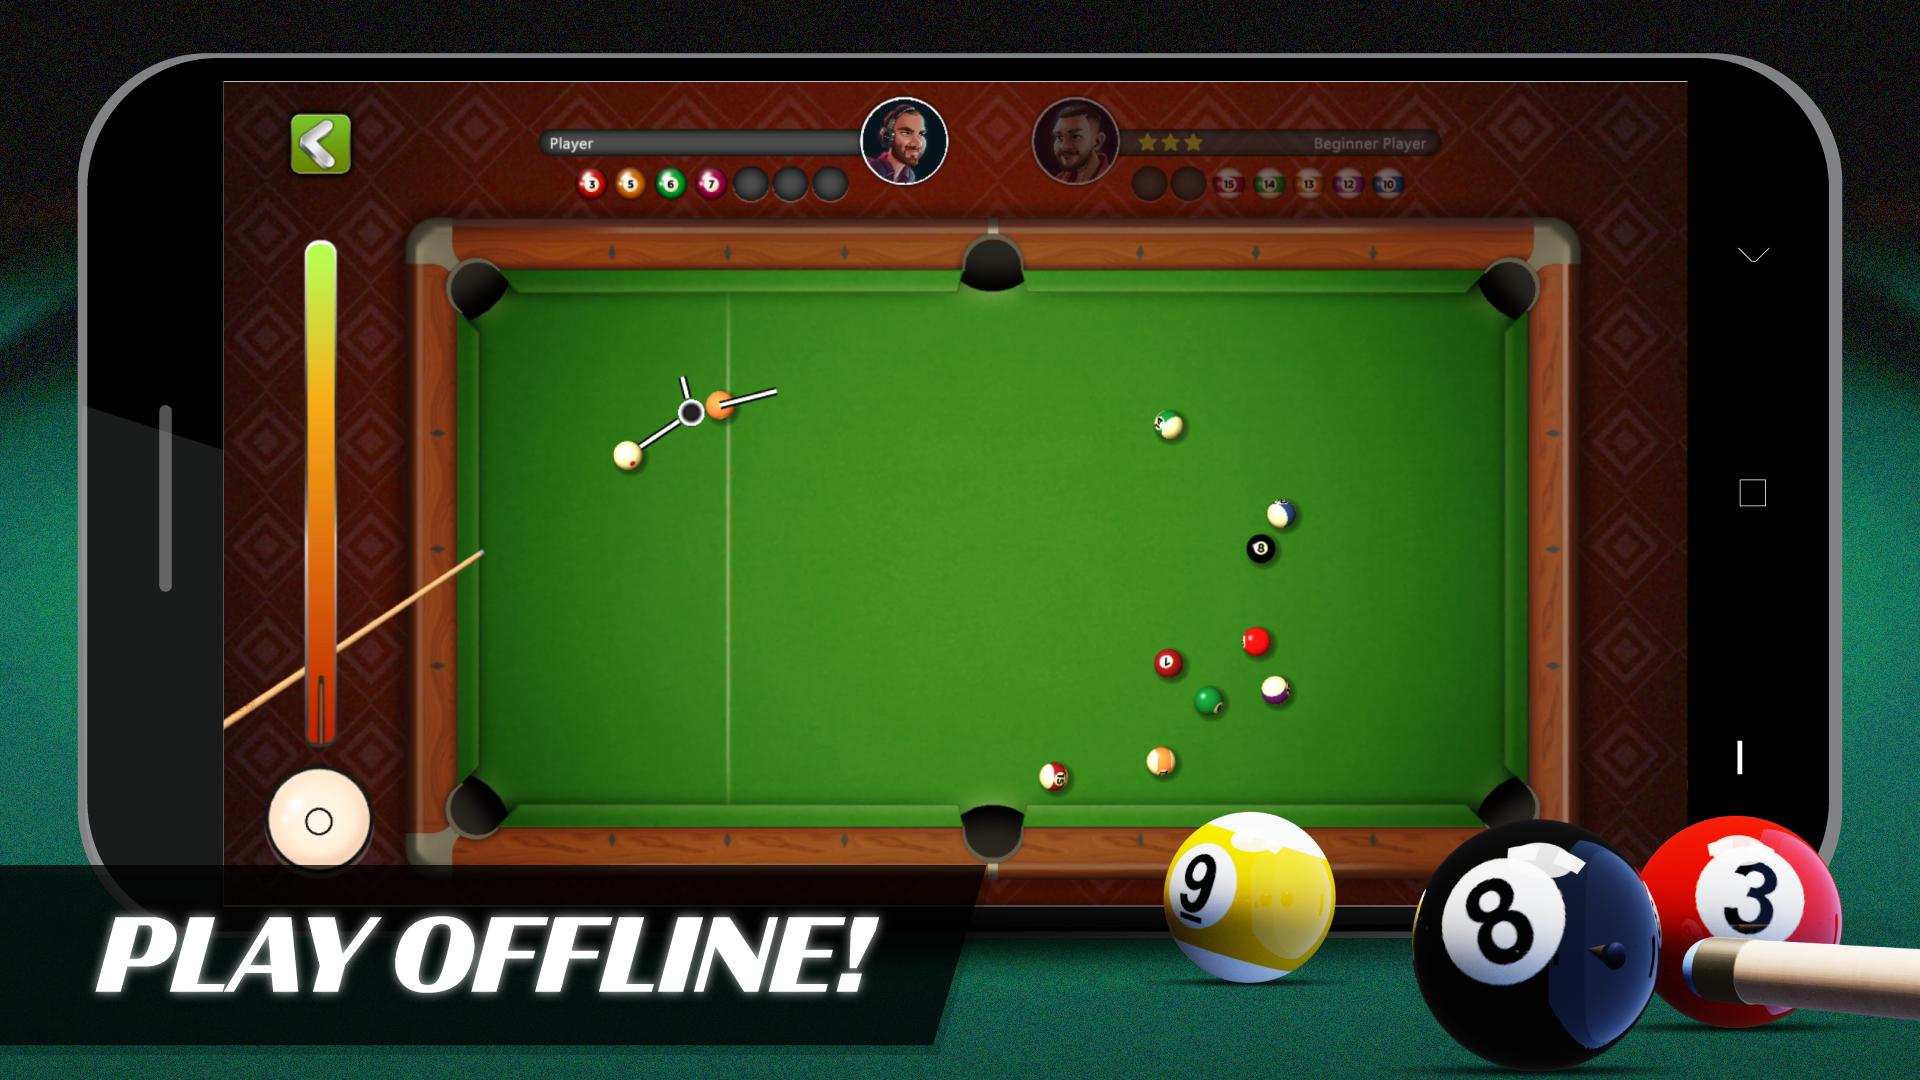 Online pool – Free 8 ball pool game - Casual Arena